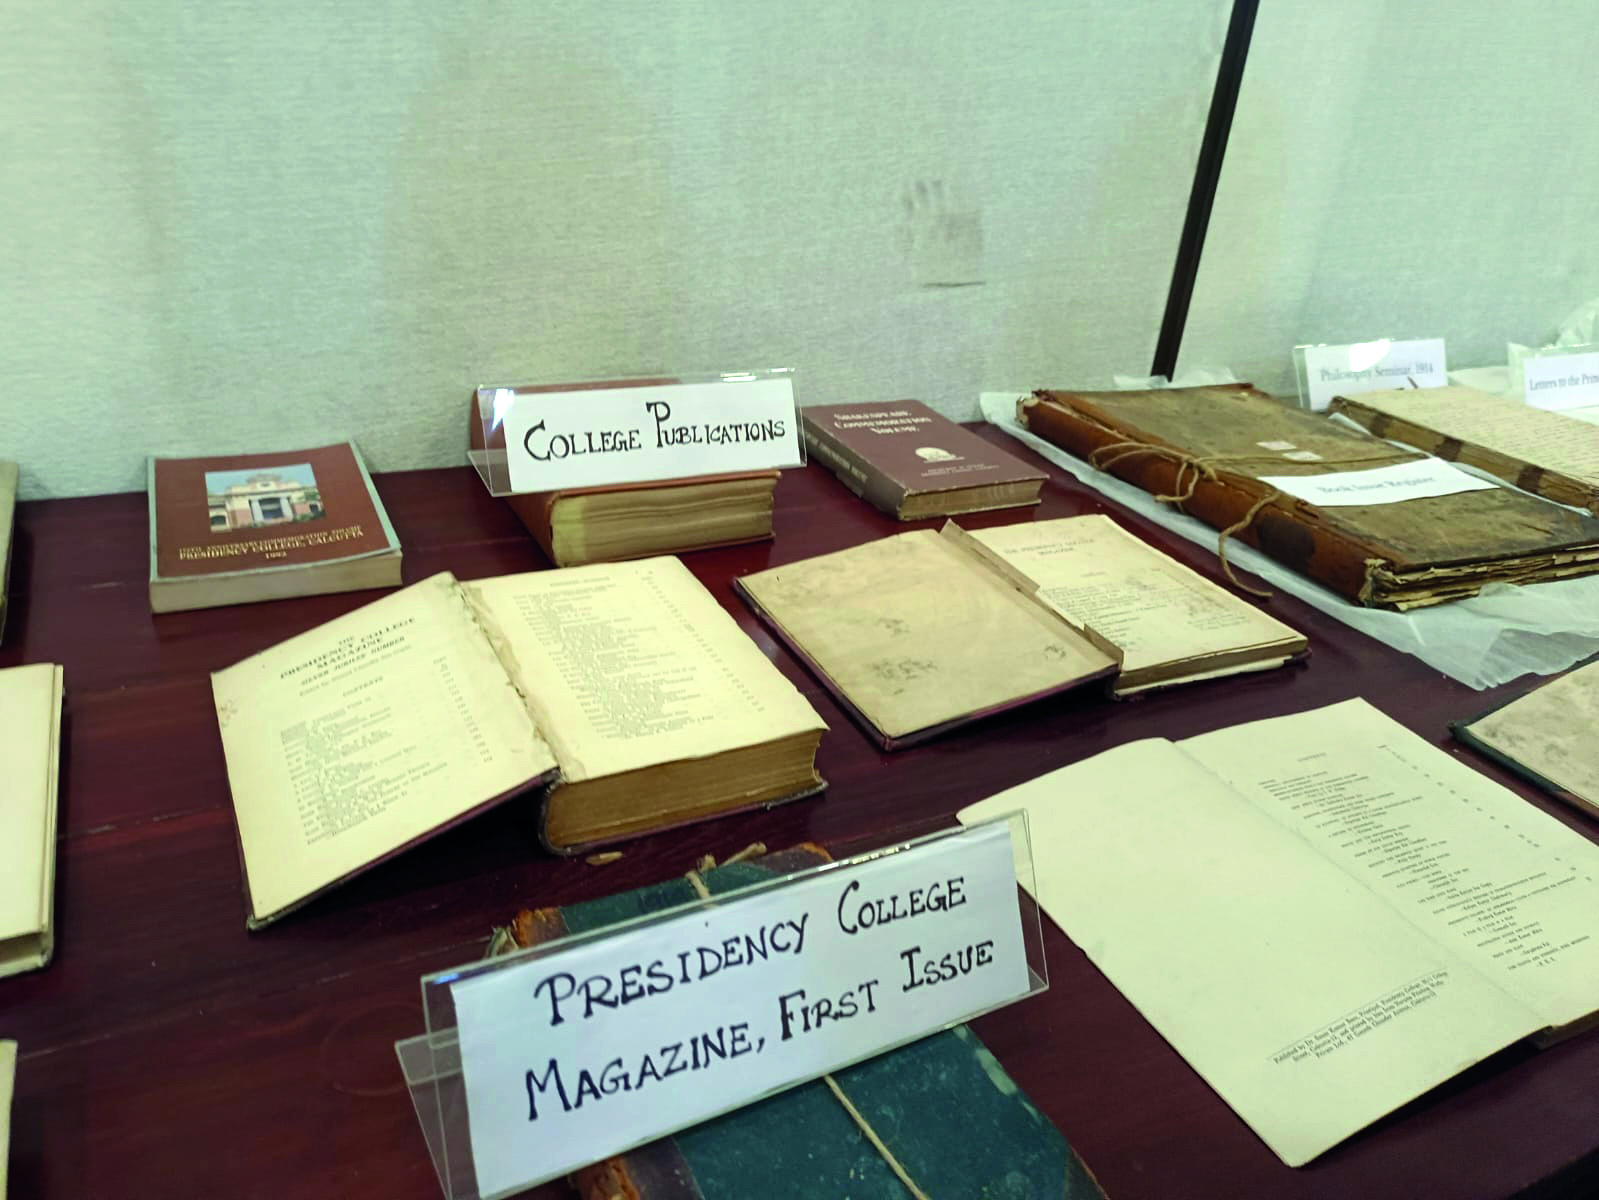 Archives with over 200-yr-old records on Presidency College inaugurated